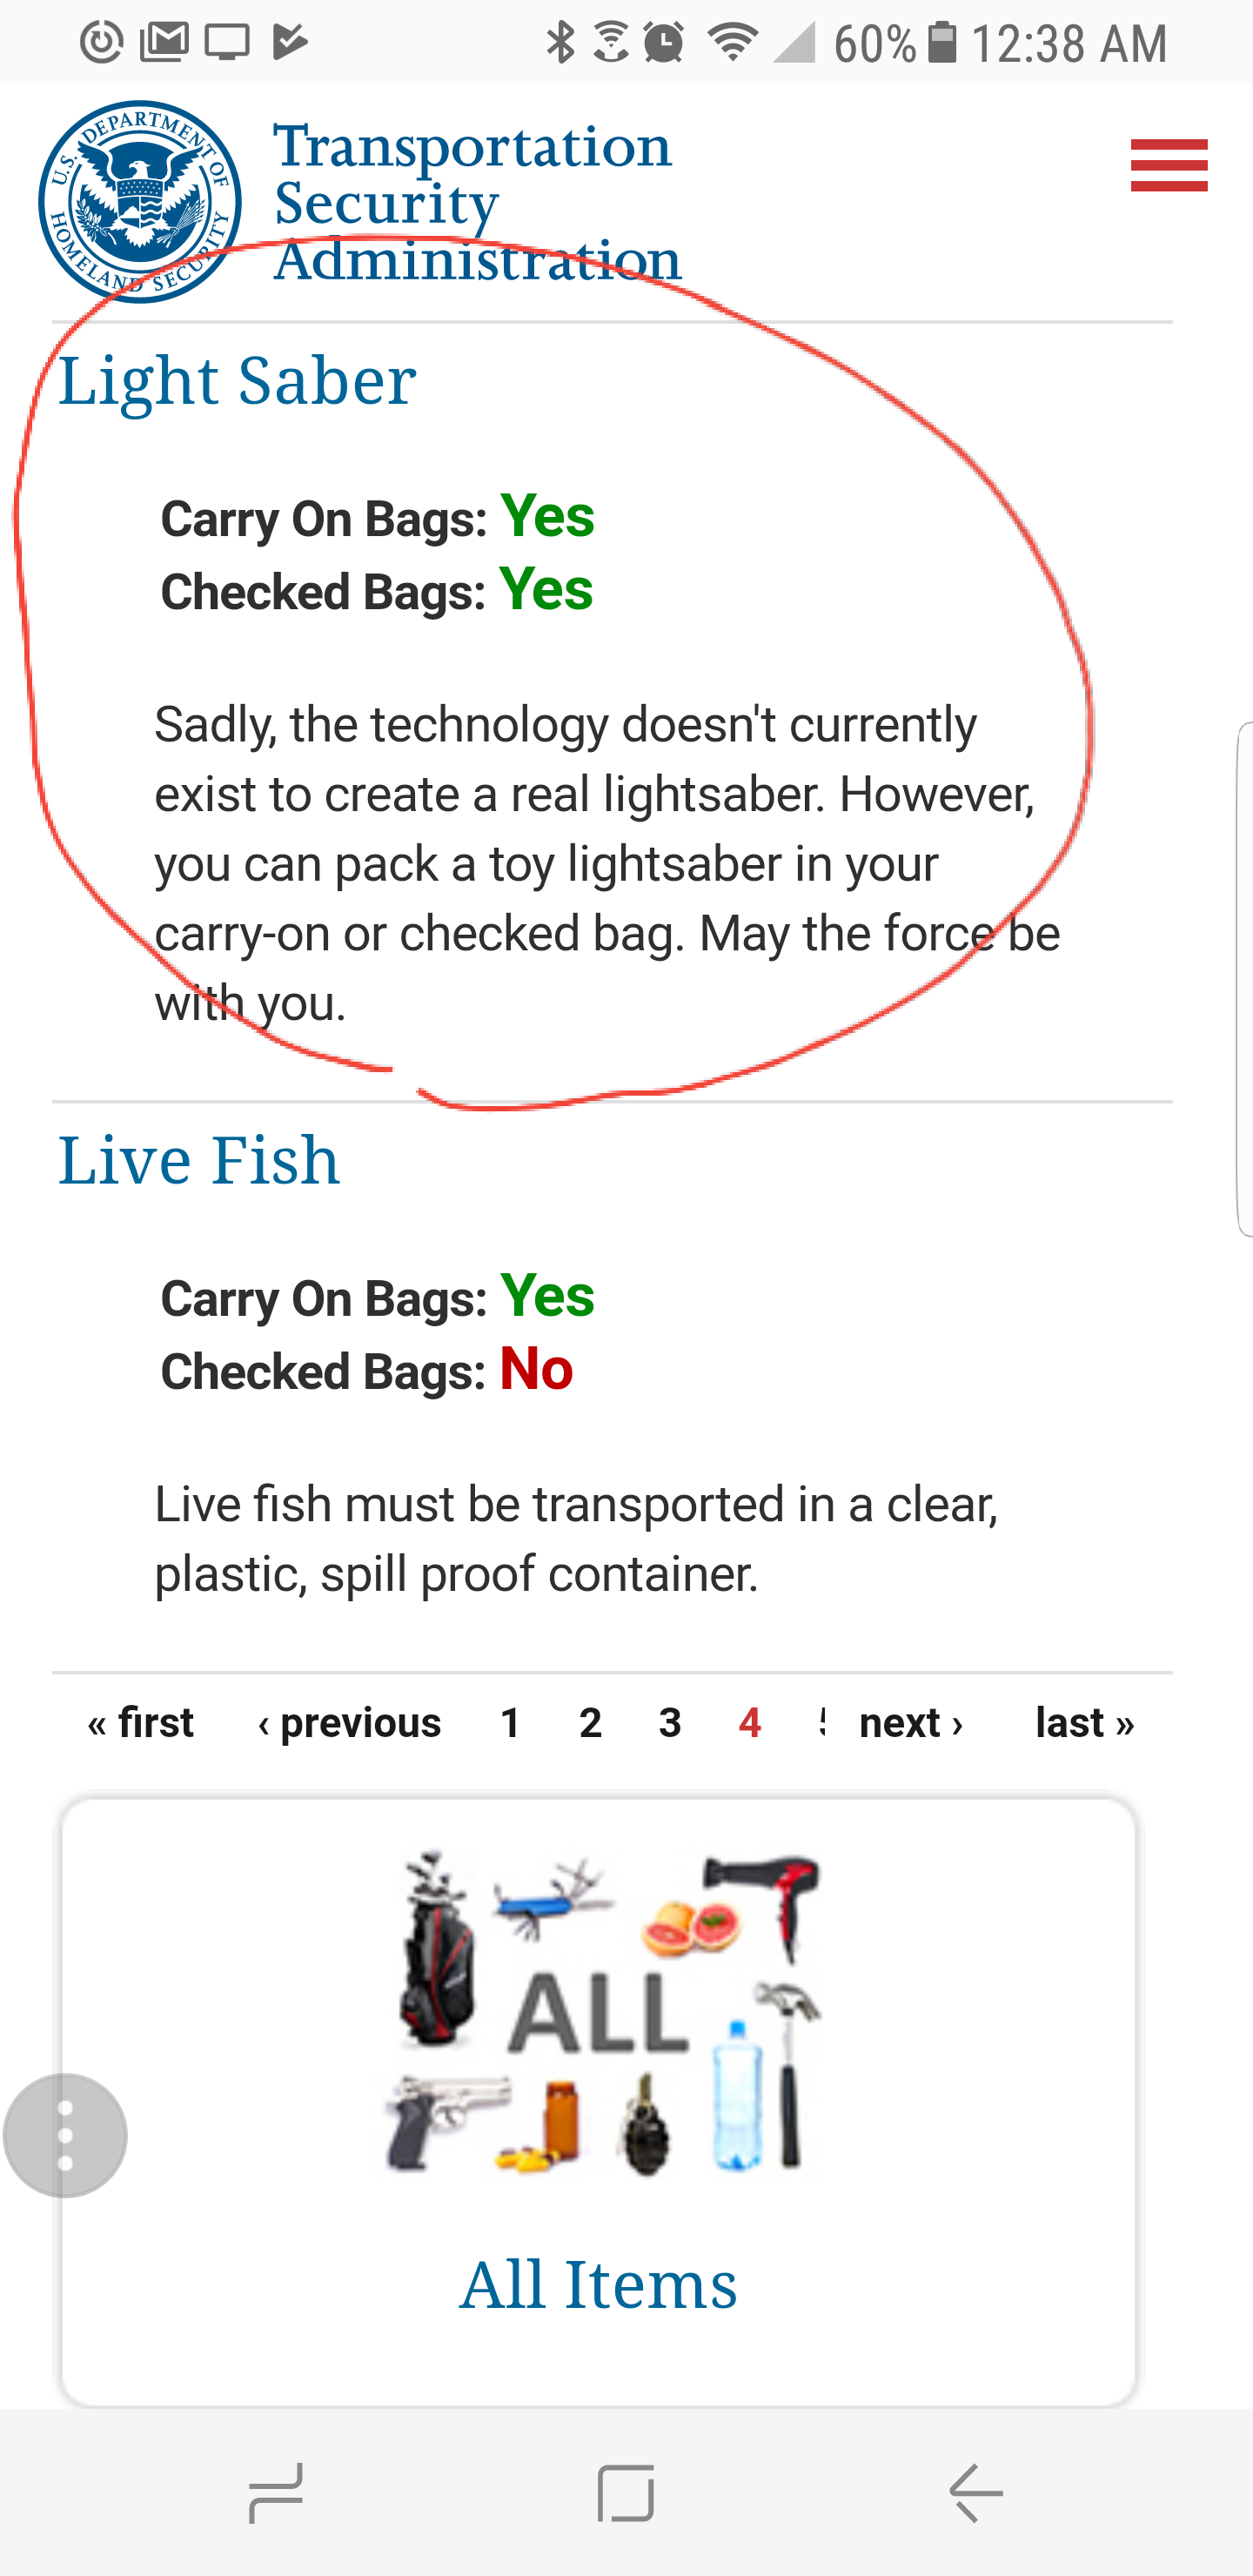 Found this while checking the tsa's website for what you can bring through security